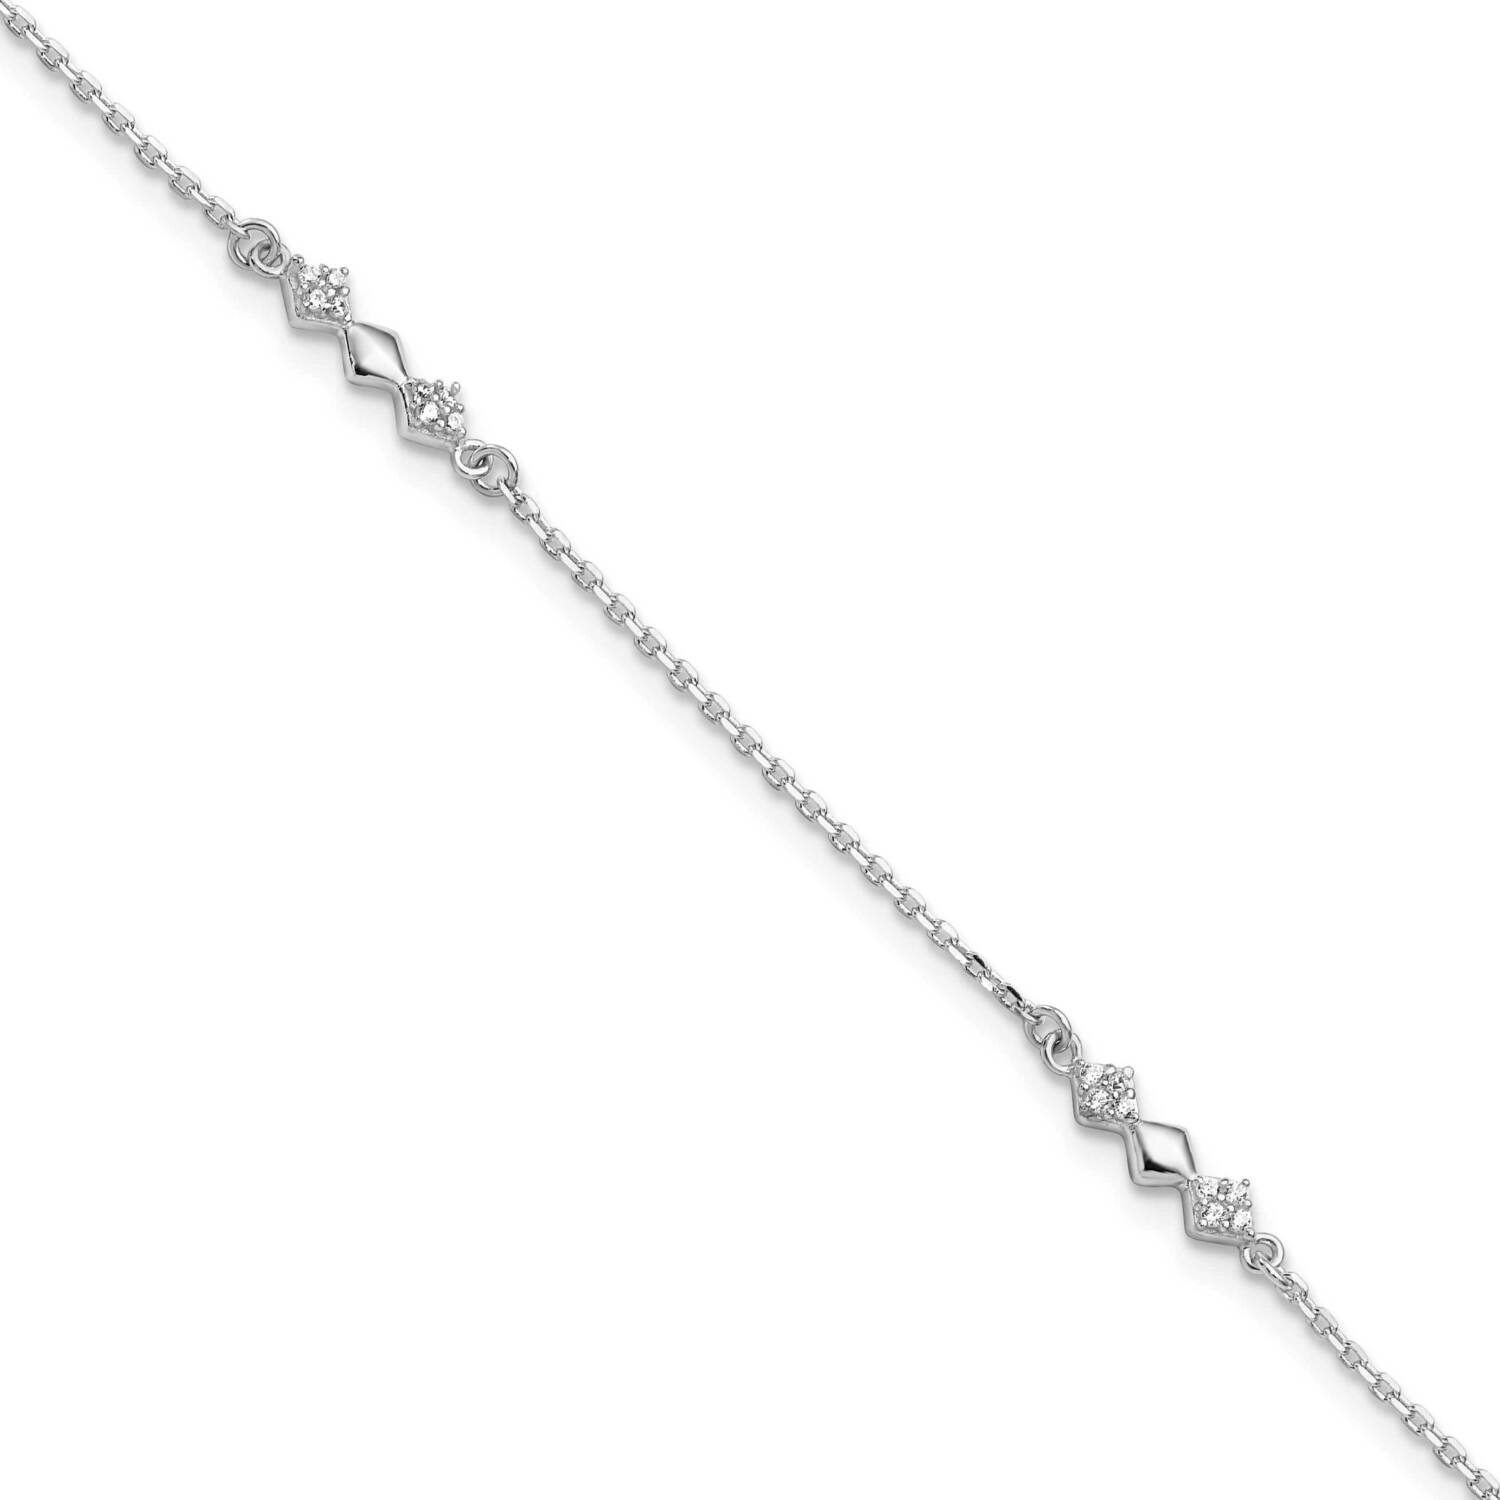 3-Diamond Shapes 9 Inch Plus 1 Inch Extender Anklet Sterling Silver Cz Diamond QG5763-9